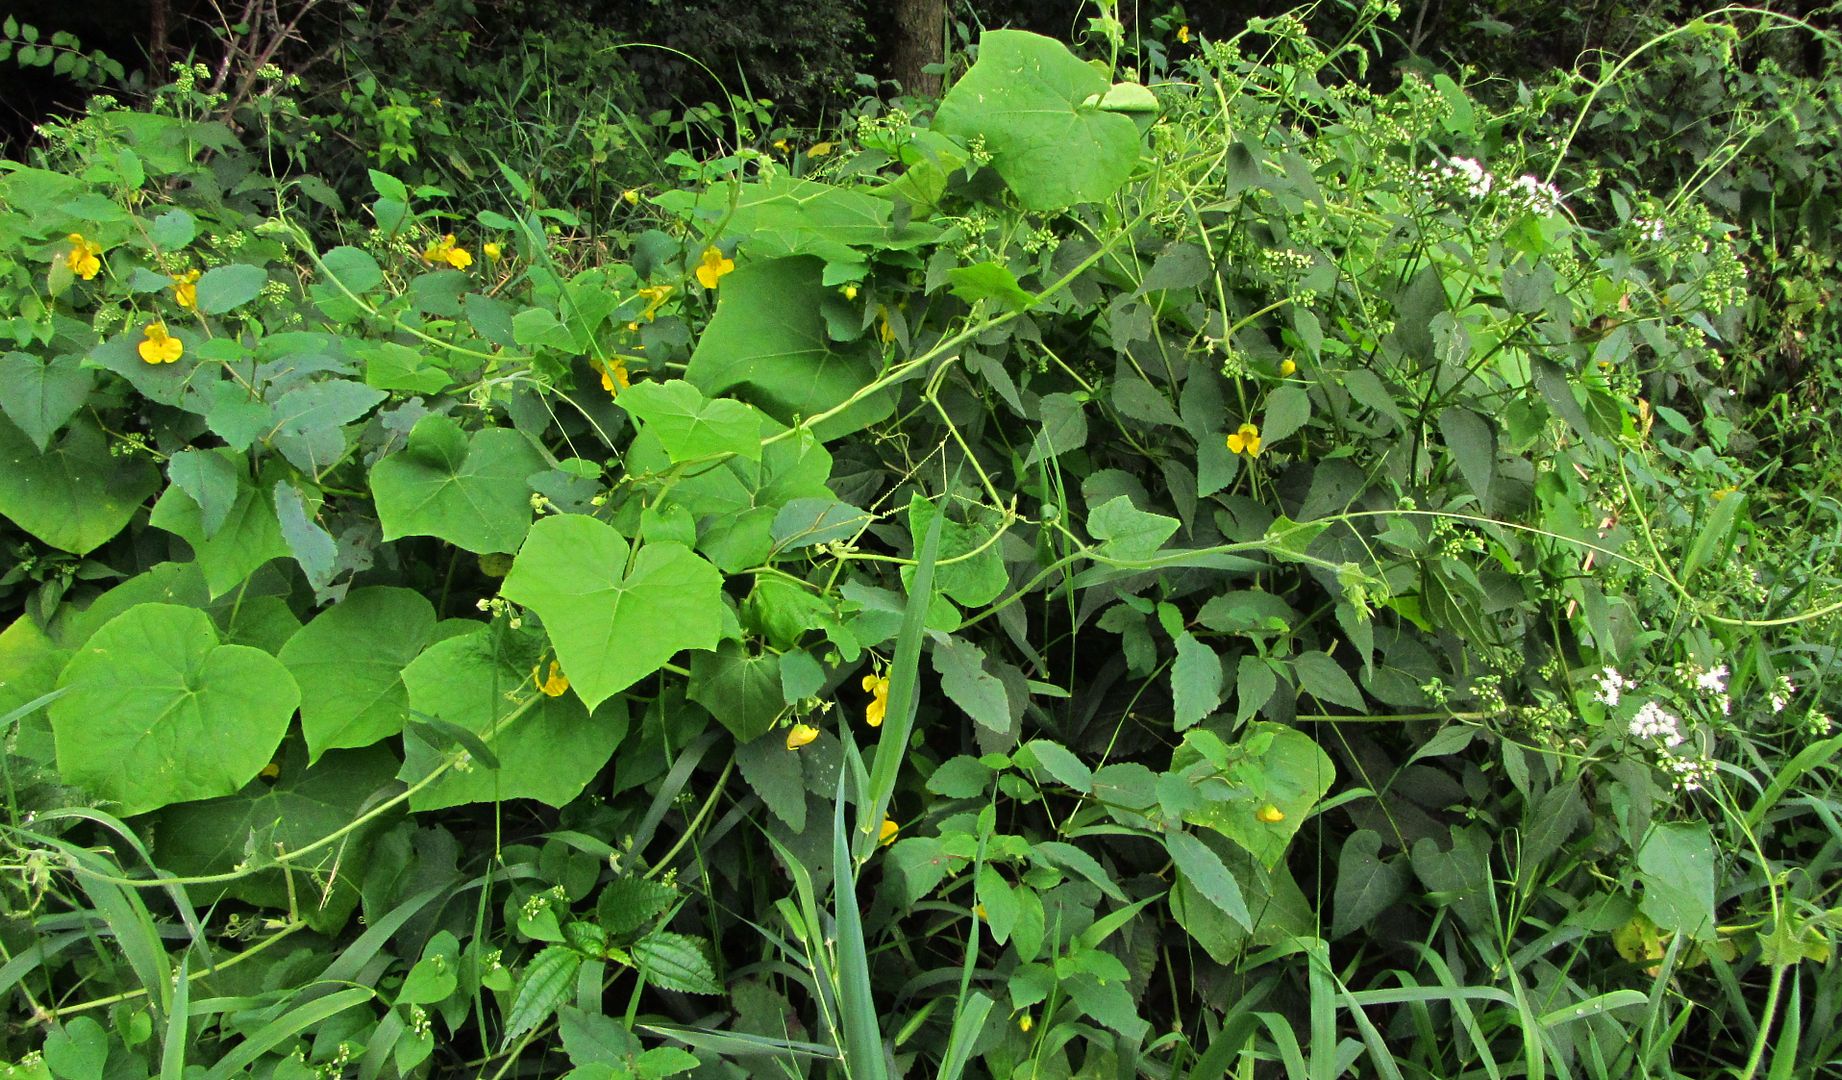 Jewelweed, bur cucumber and white snakeroot photo burcucumberjewelweedsnakeroot_zpsvq5rvlyw.jpg